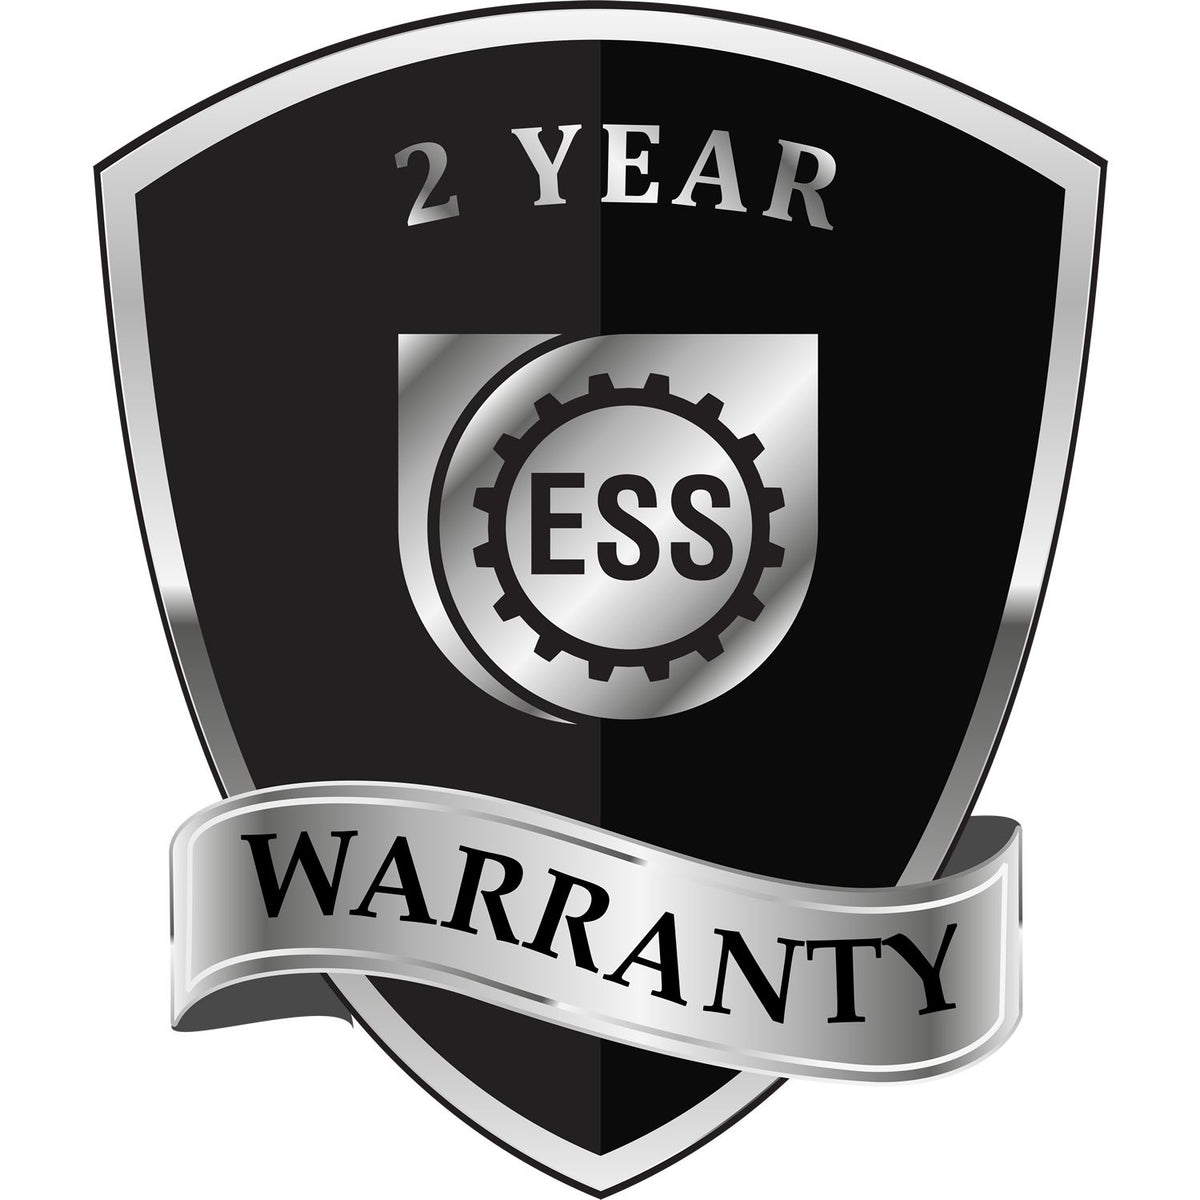 A badge or emblem showing a warranty icon for the West Virginia Engineer Desk Seal